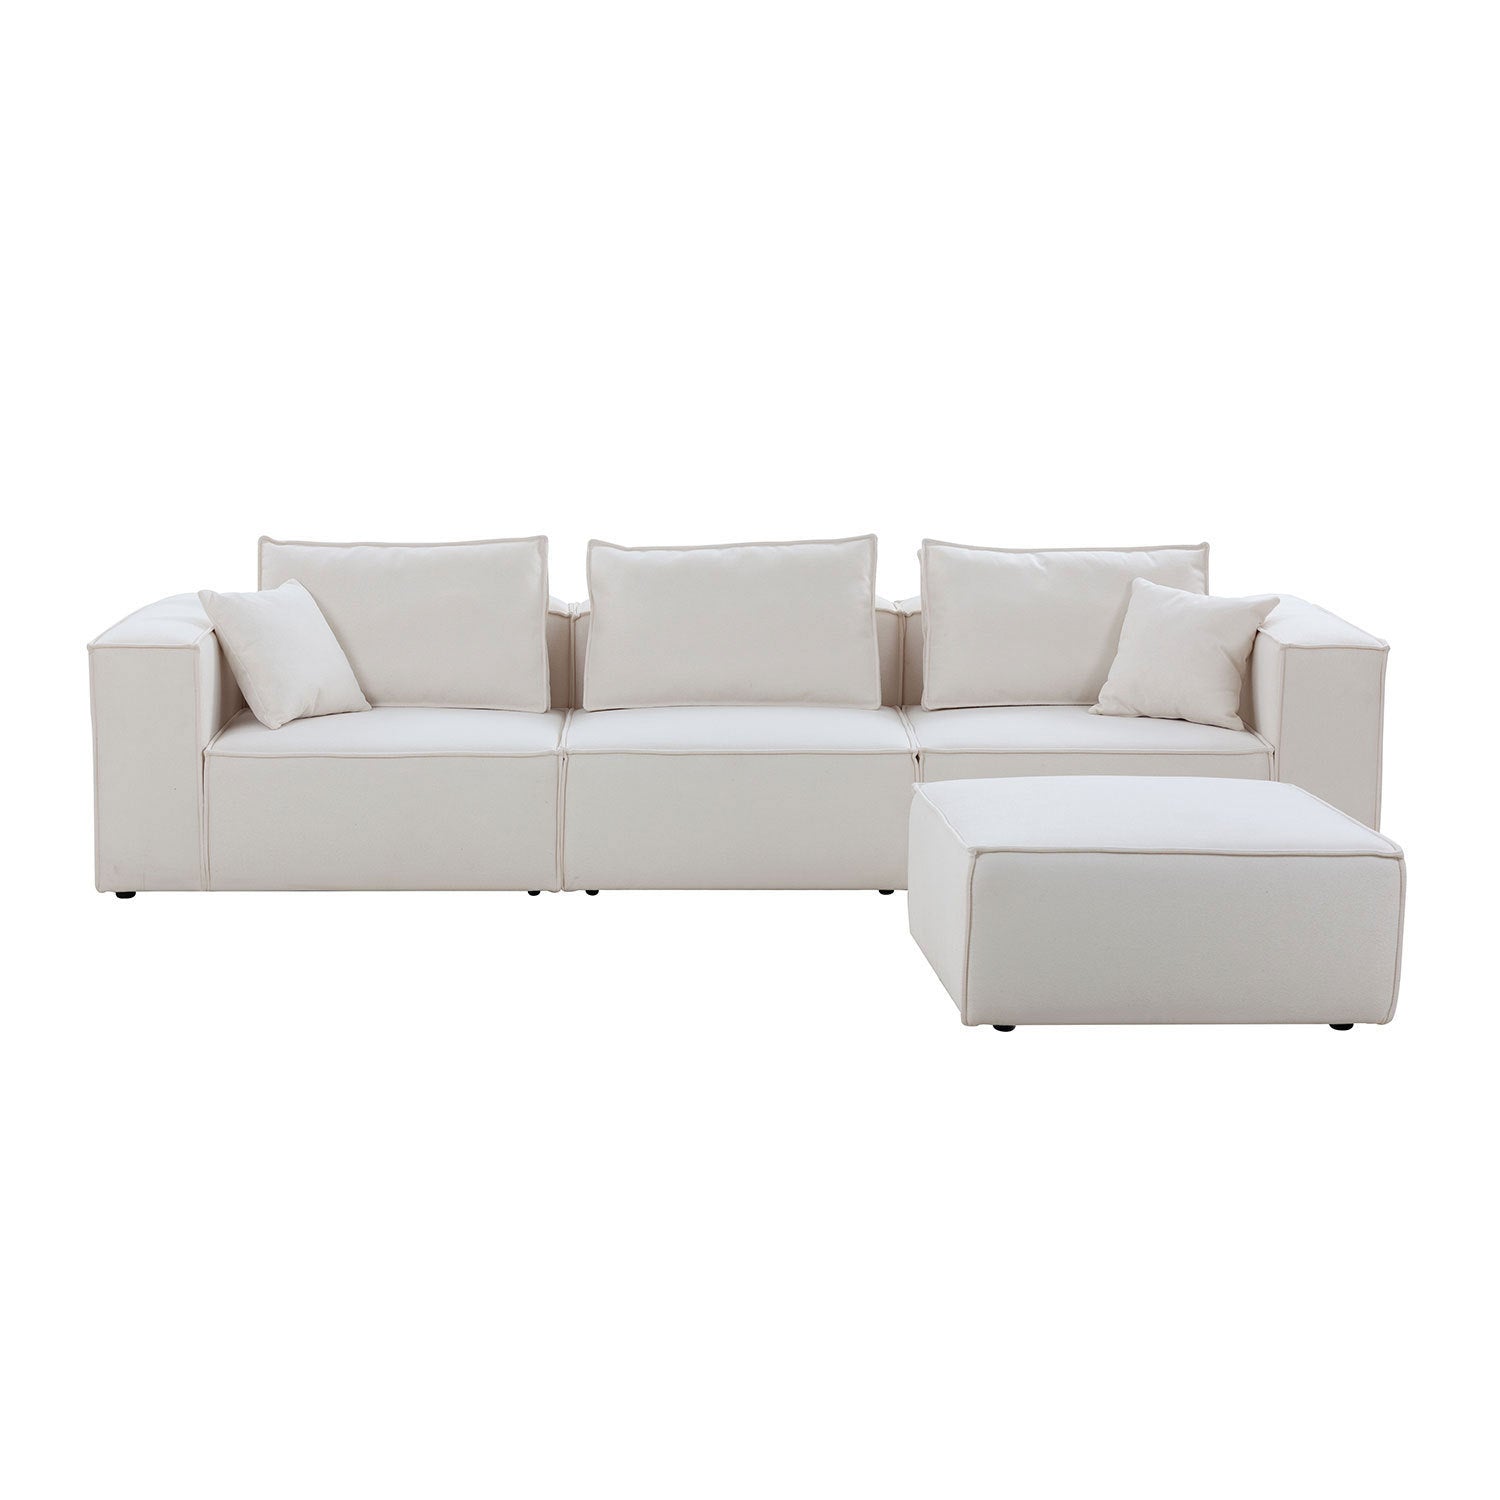 Modular Sectional Living Room Sofa Set, Modern Minimalist Style Couch with Ottoman and Reversible Chaise, L-Shape - White